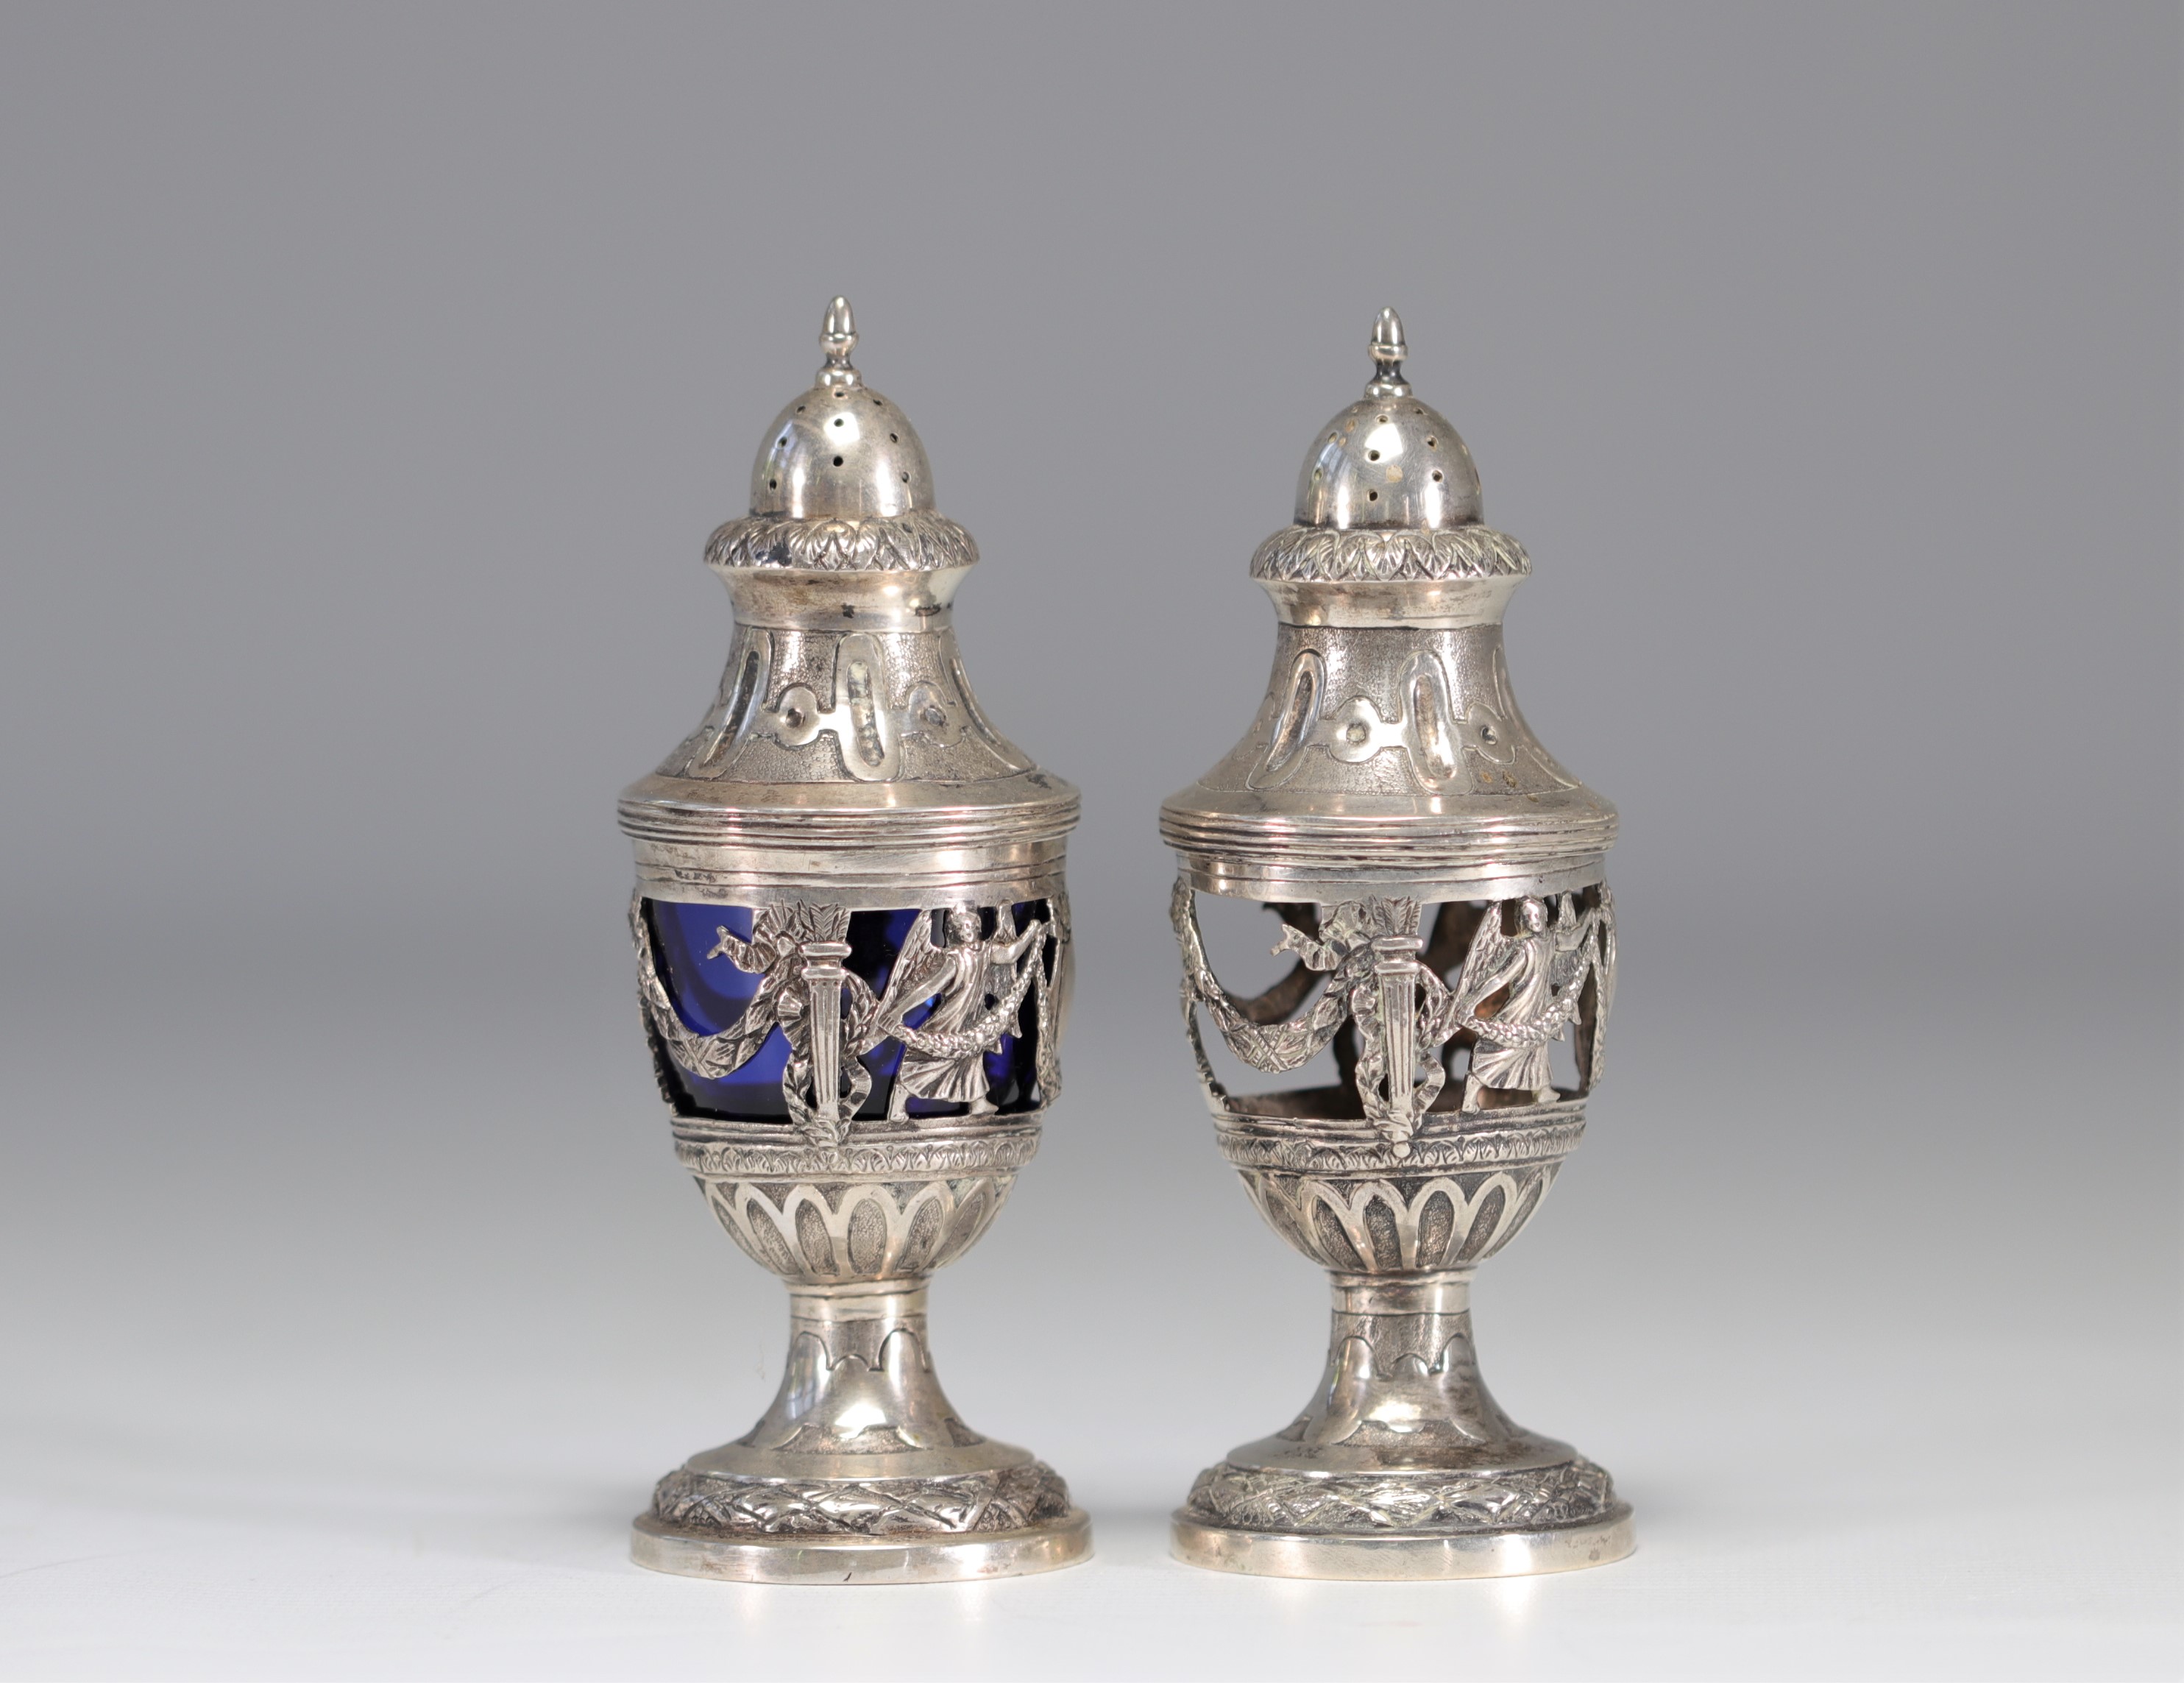 Solid silver sprinklers with Reims hallmarks from the 18th century